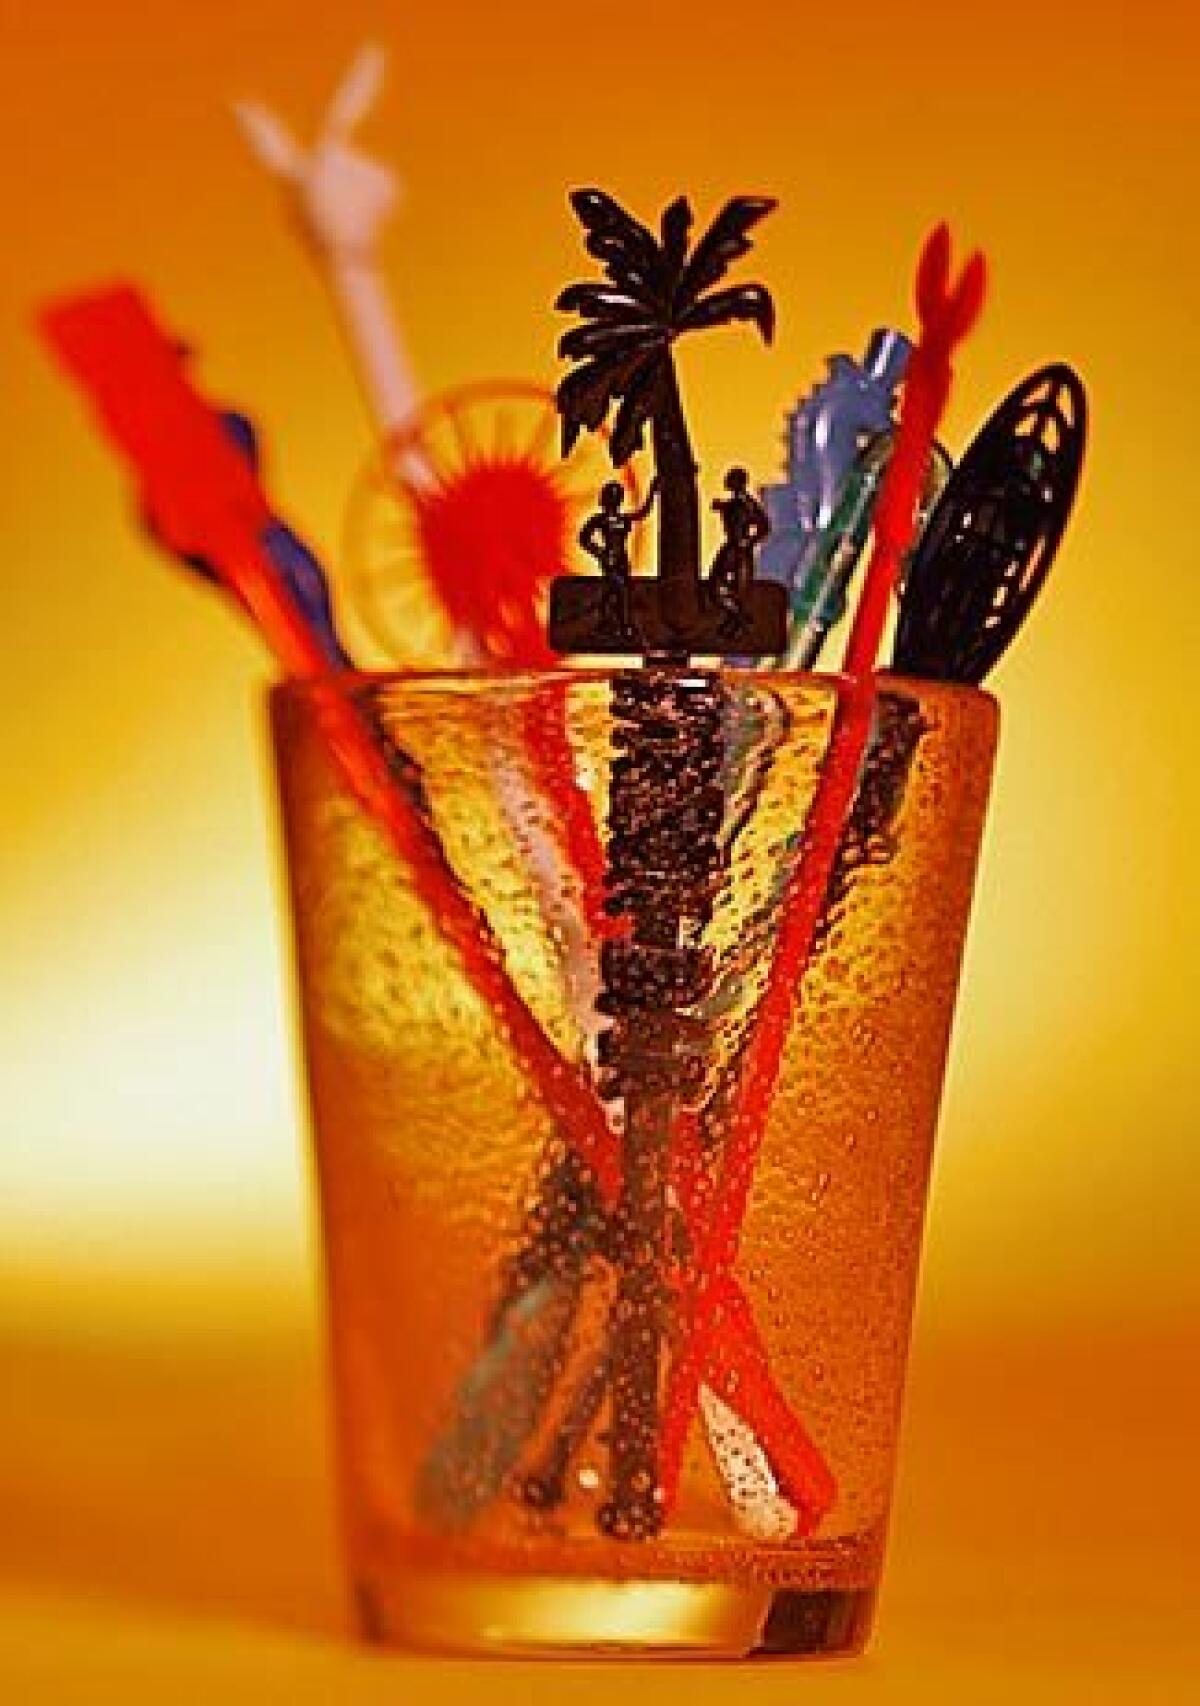 Swizzle sticks became an important part of any lounges décor.